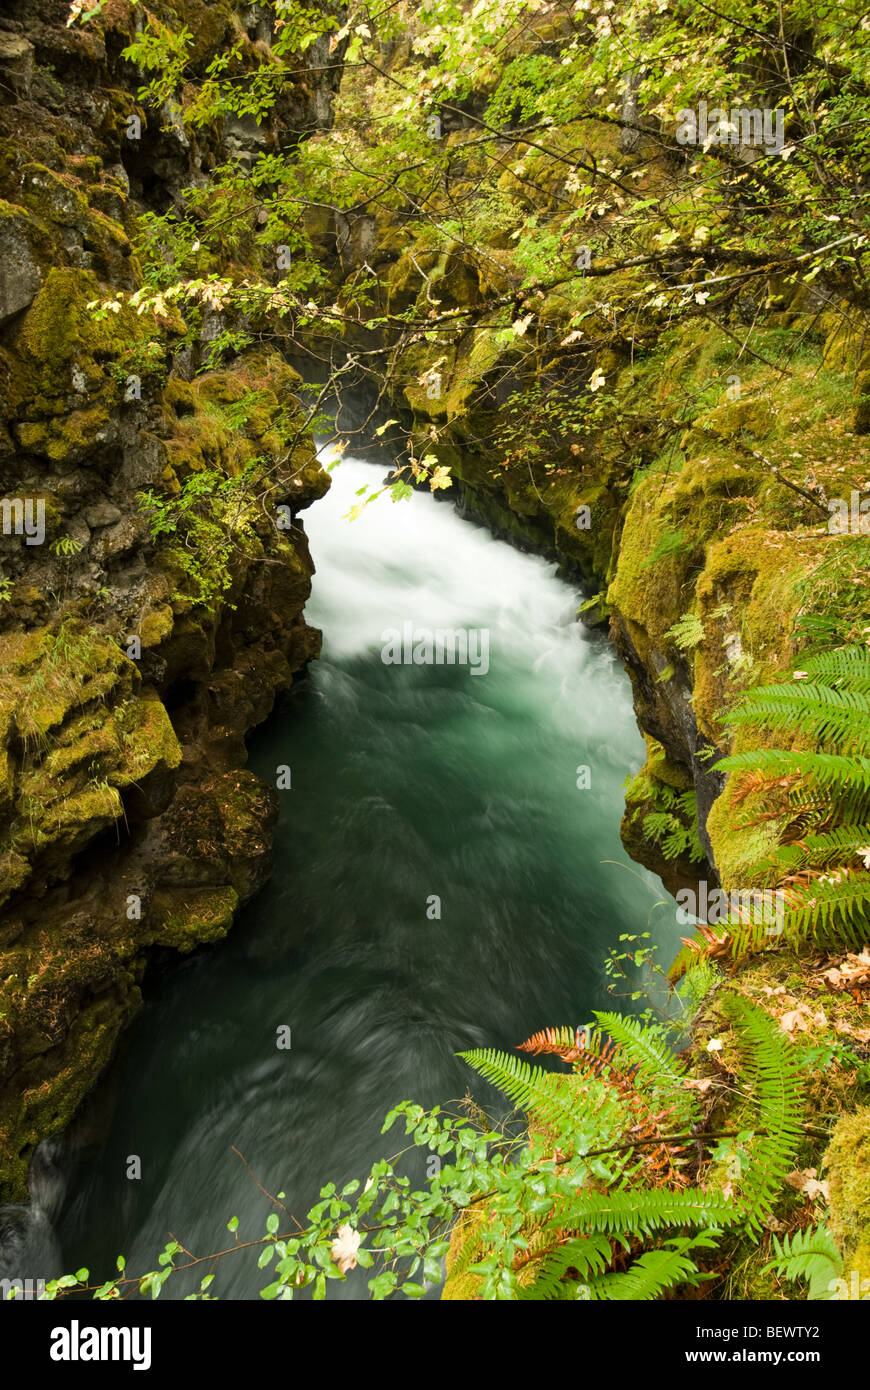 The Rogue River from the Rogue Gorge Interpretive trail, Oregon. Stock Photo